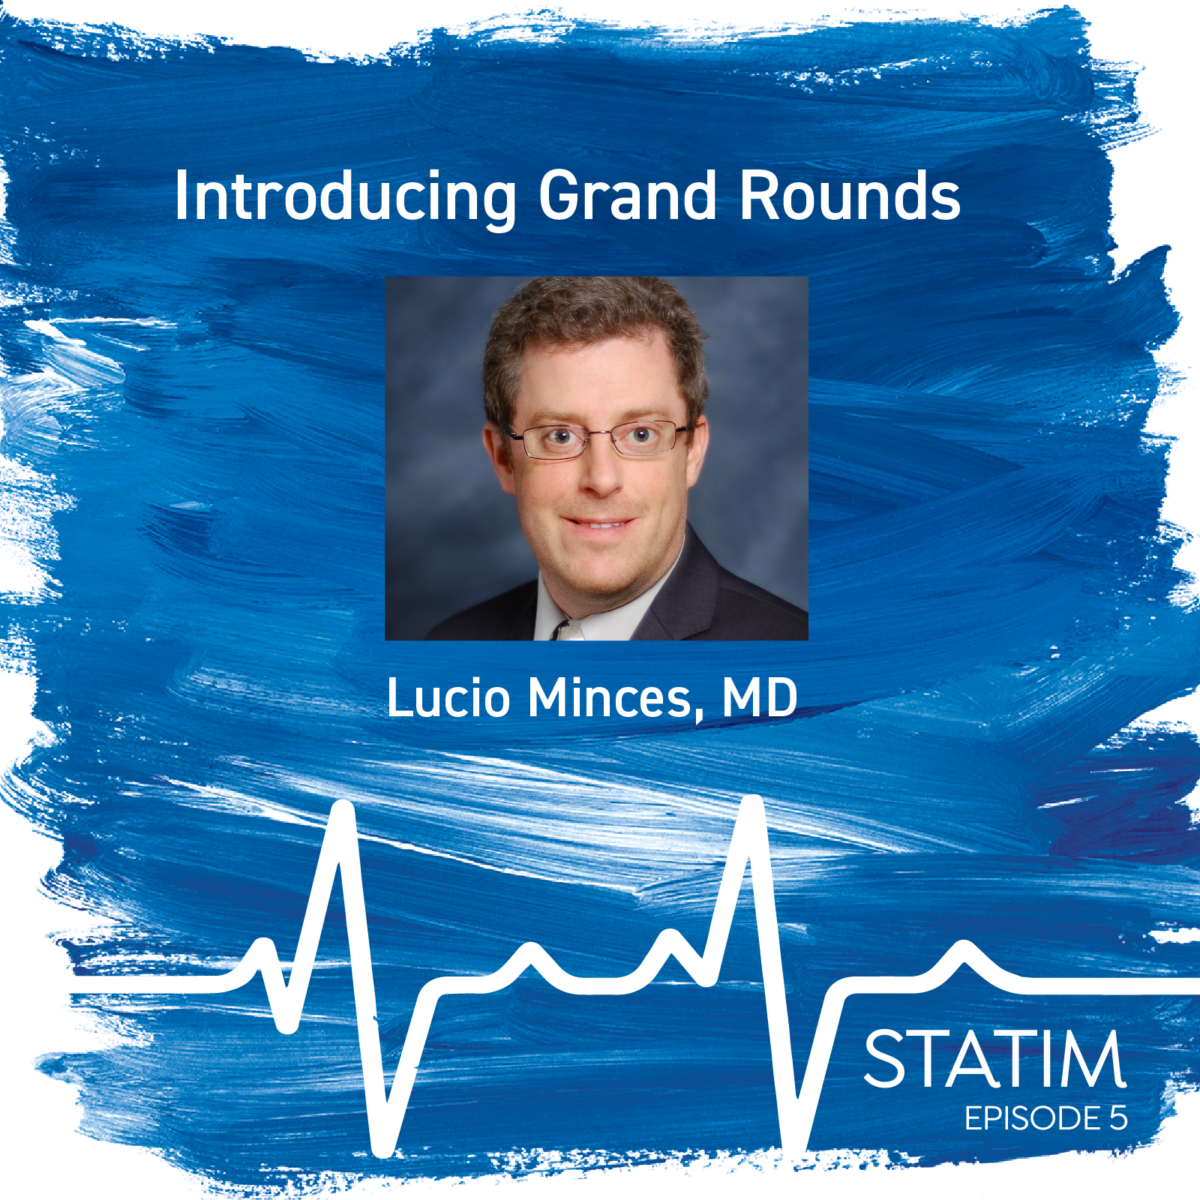 Promotion for the STATIM episode five with Dr. Lucio Minces on the topid of the new Grand Rounds at CentraCare